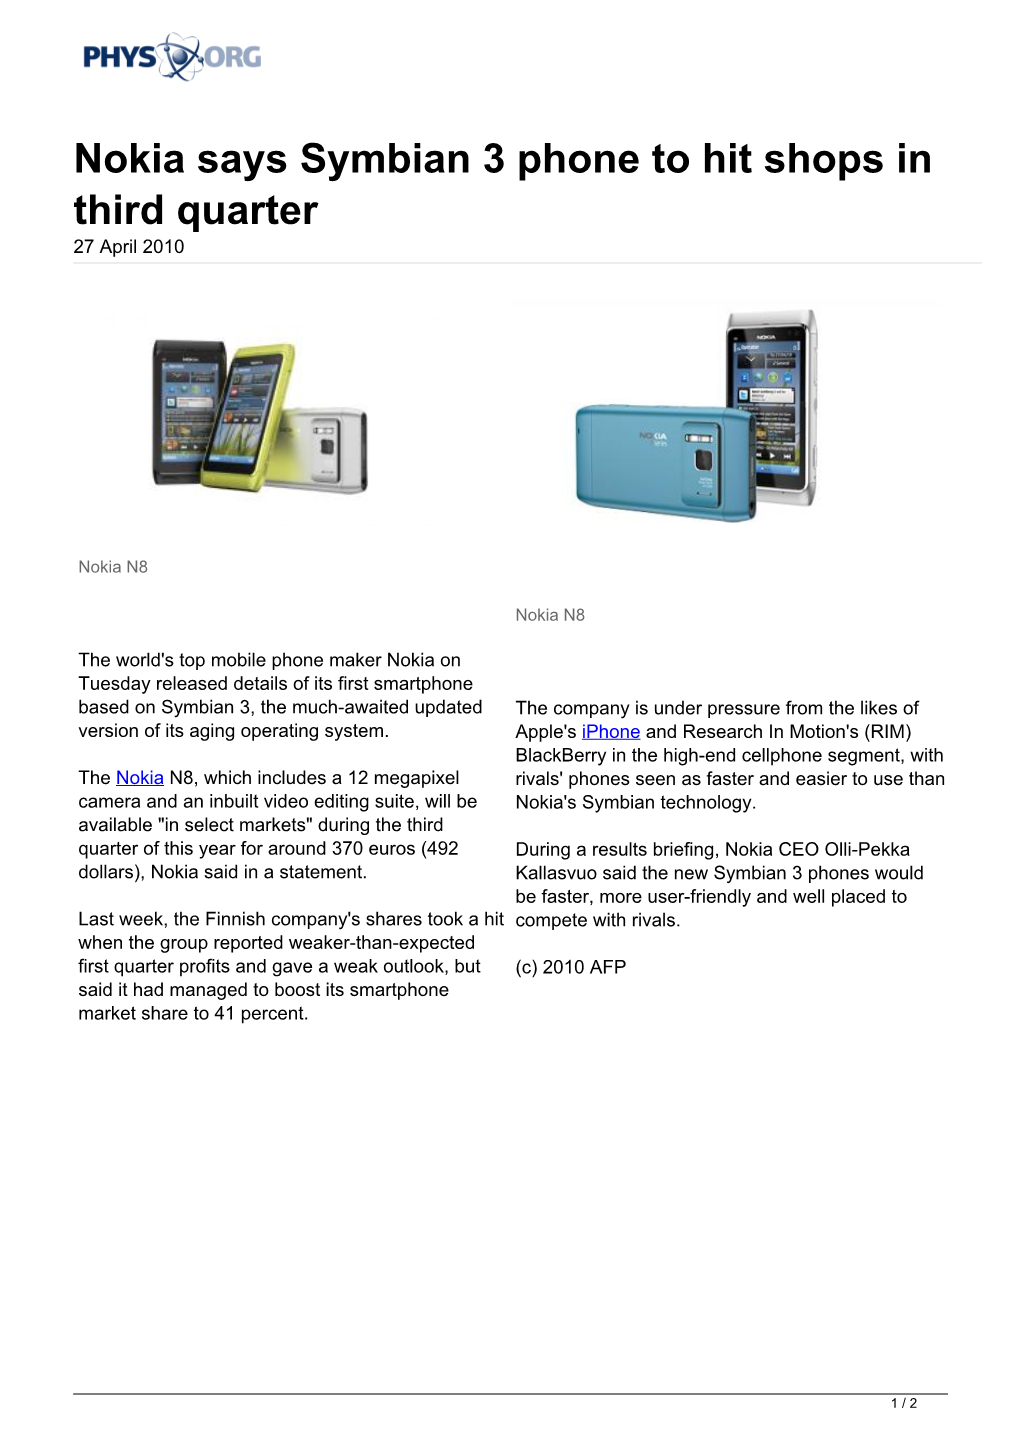 Nokia Says Symbian 3 Phone to Hit Shops in Third Quarter 27 April 2010